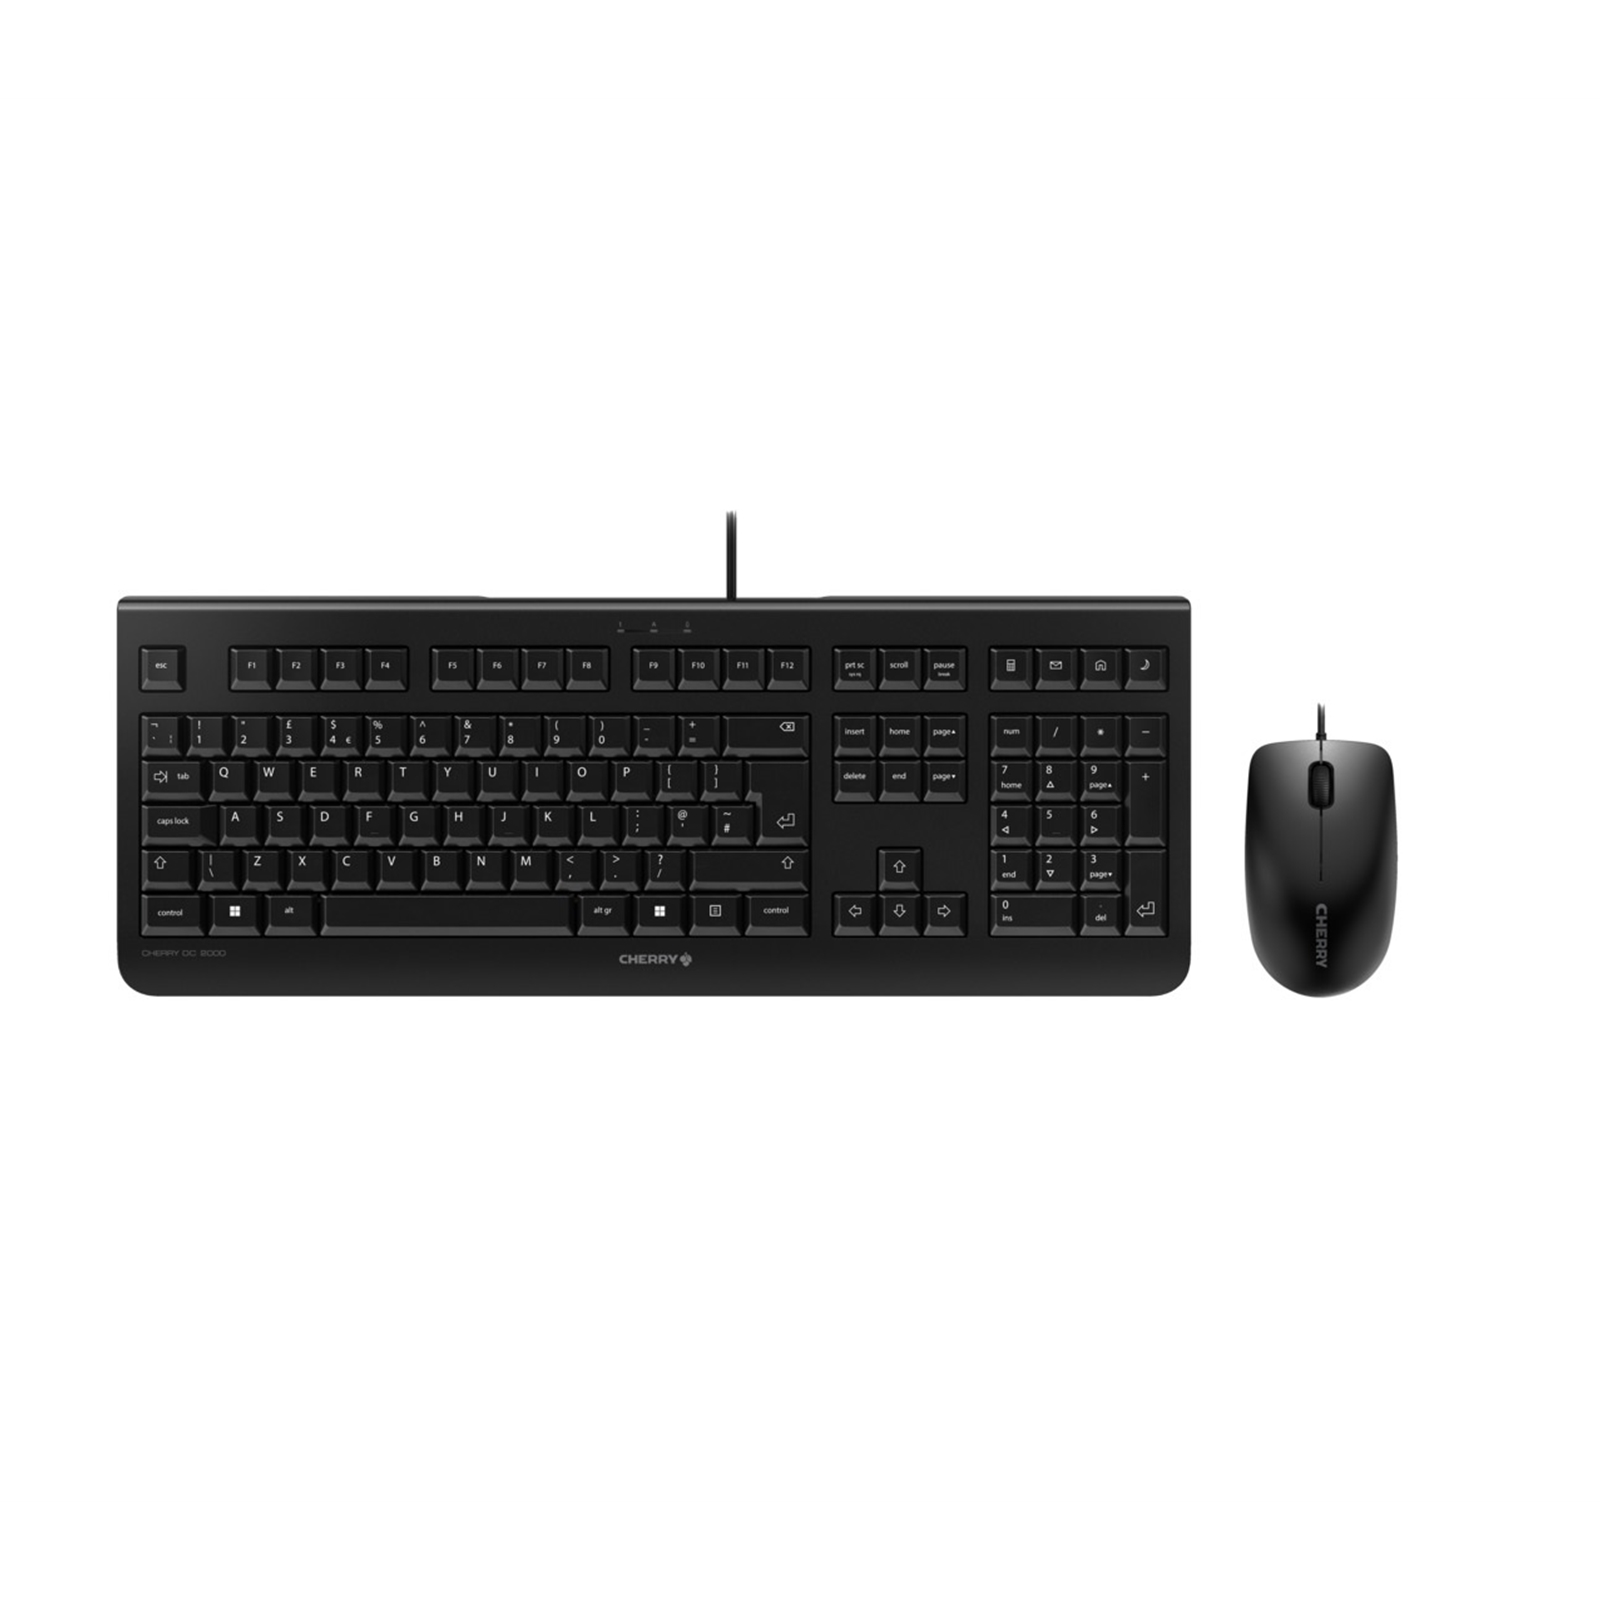 Cherry DC 2000 Wired Keyboard and Mouse Combo, USB Plug-and-Play, Full-Size Keyboard with Optical Mouse, 1200dpi, Compatible with PC and Laptop, Ideal for Home or Office, UK Layout, Black